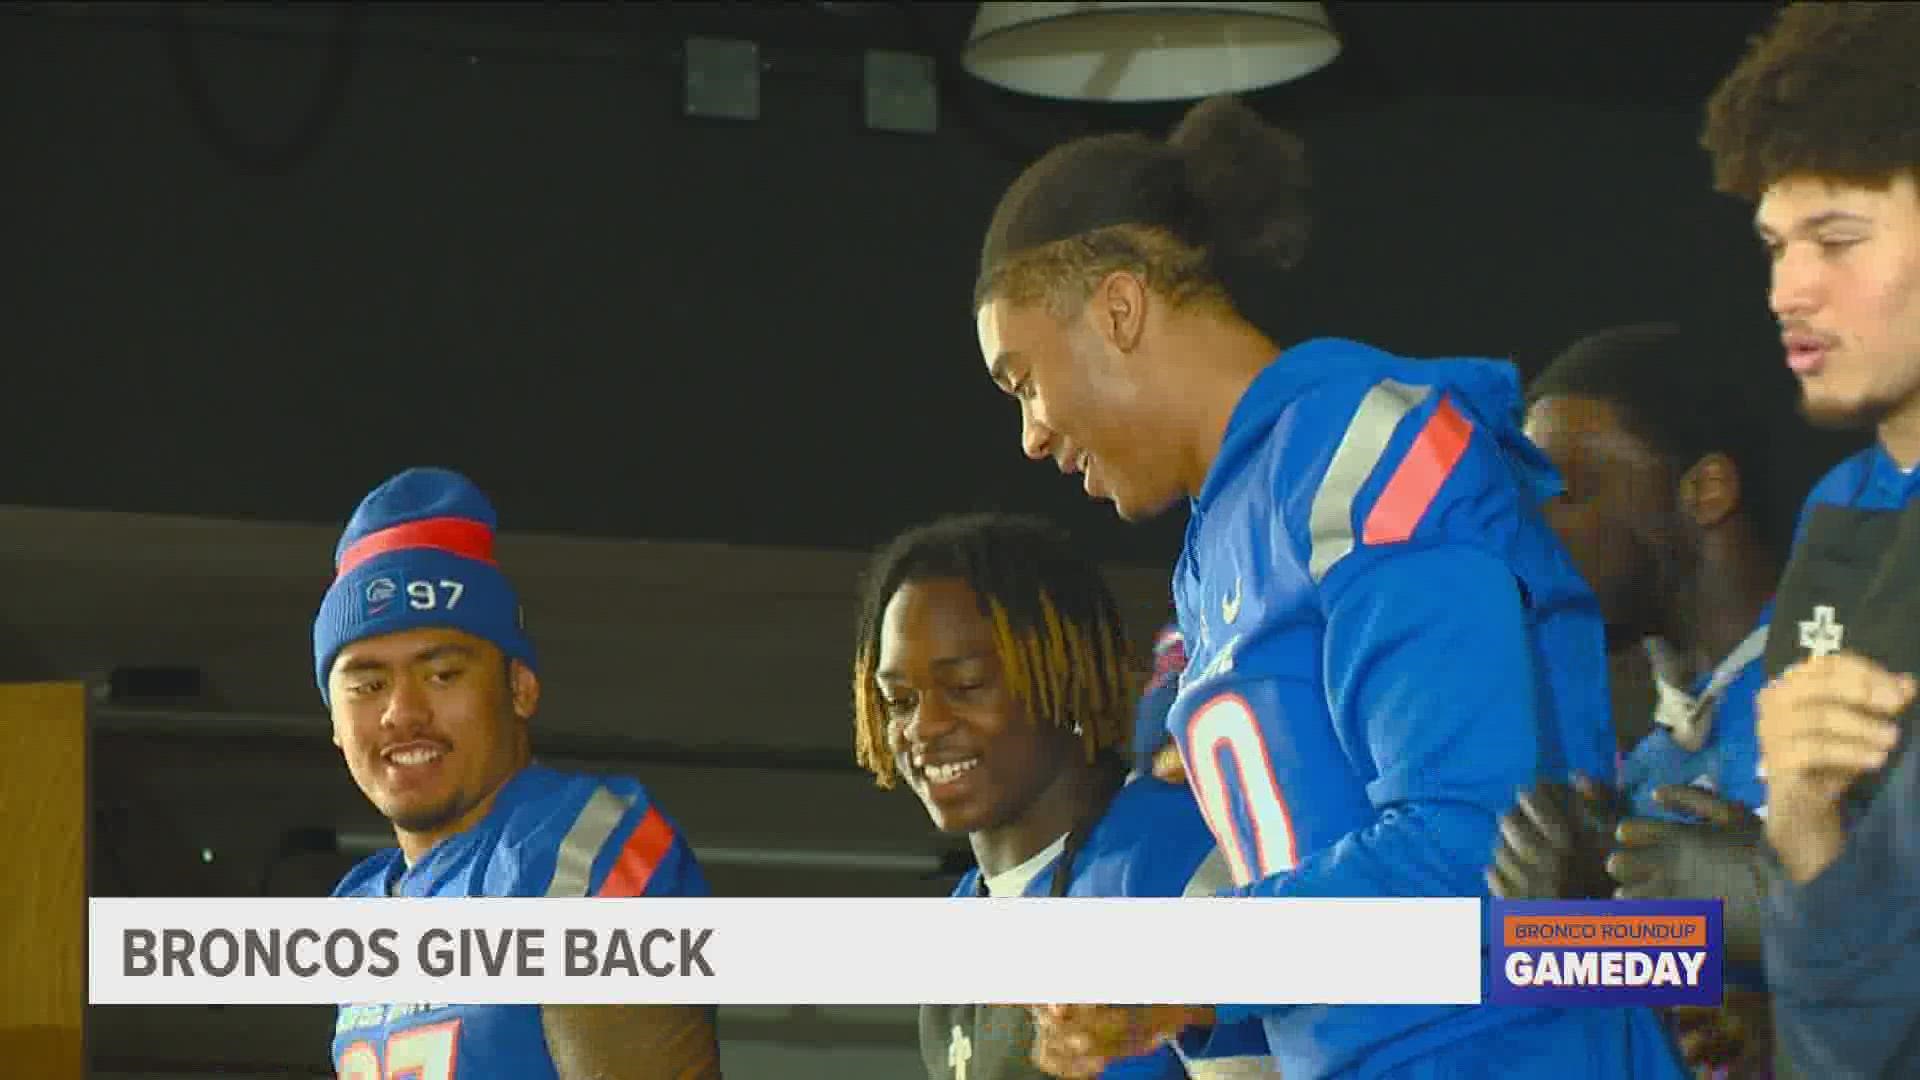 The annual event provides a hot meal for people who need a little help during the holidays. Boise State players offered a helping hand, plus on-stage entertainment.